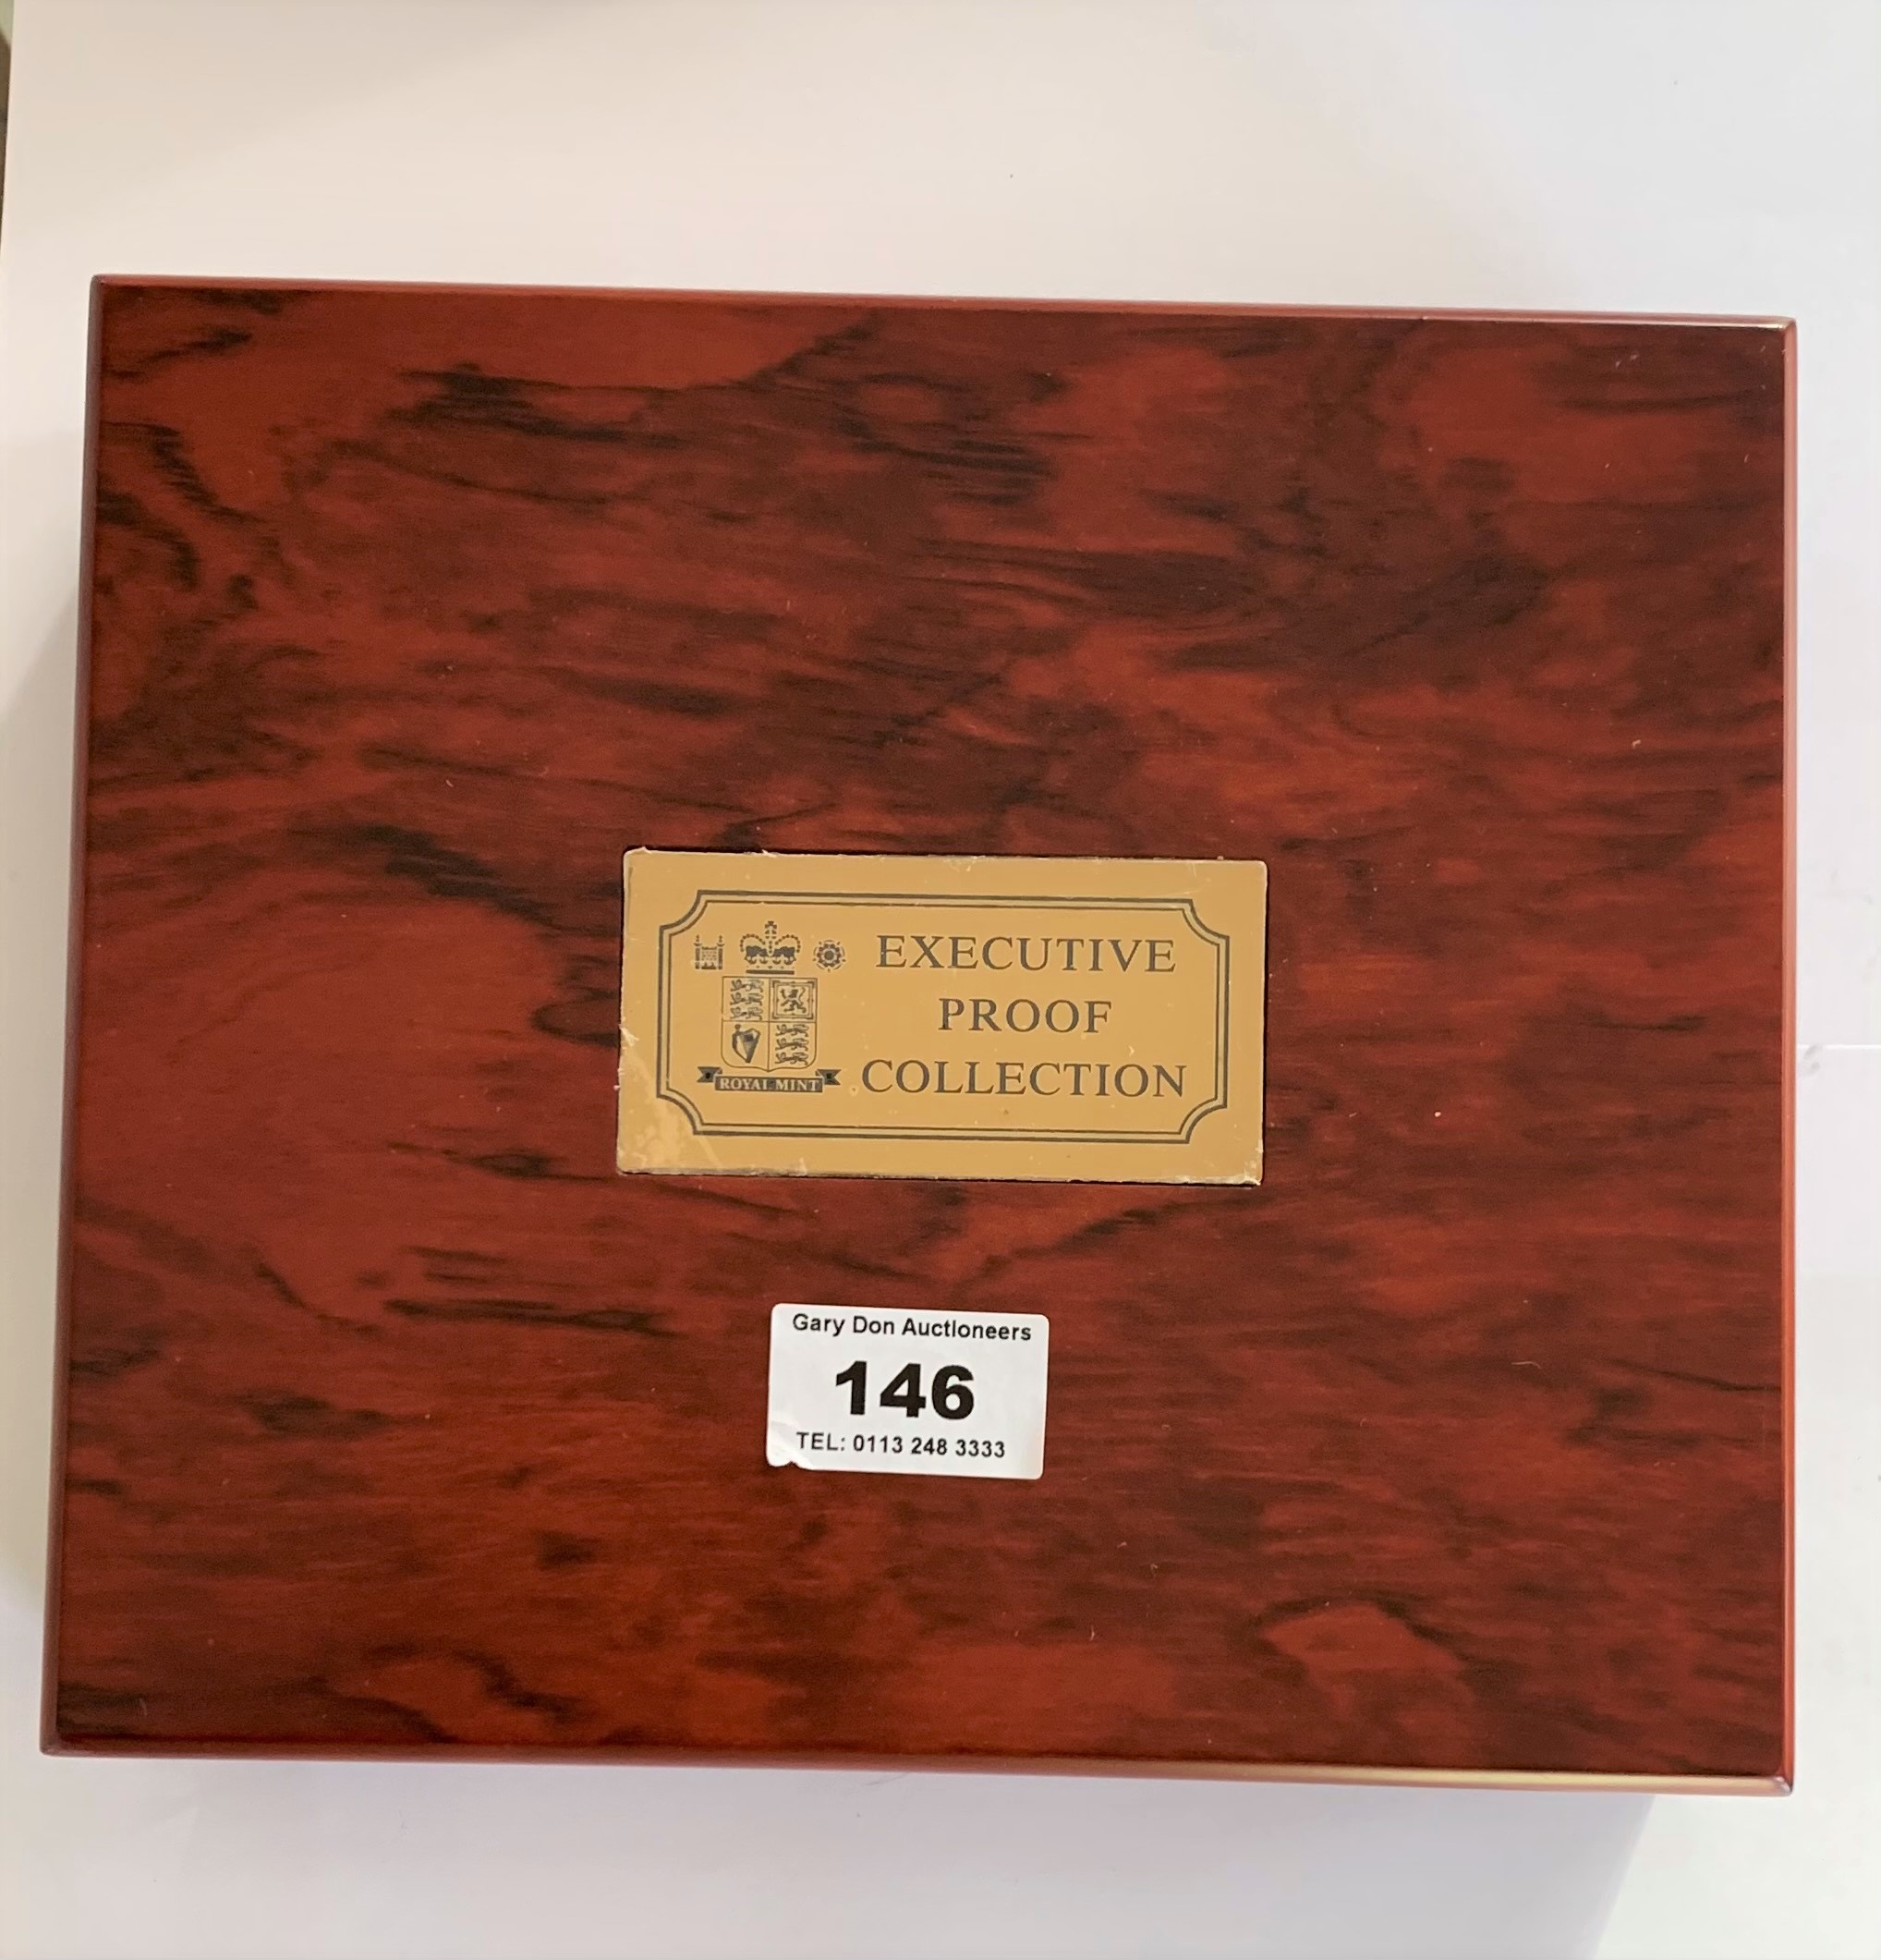 Royal Mint 2007 UK Executive Proof Collection in wooden box, No. 4311/5000 - Image 2 of 2